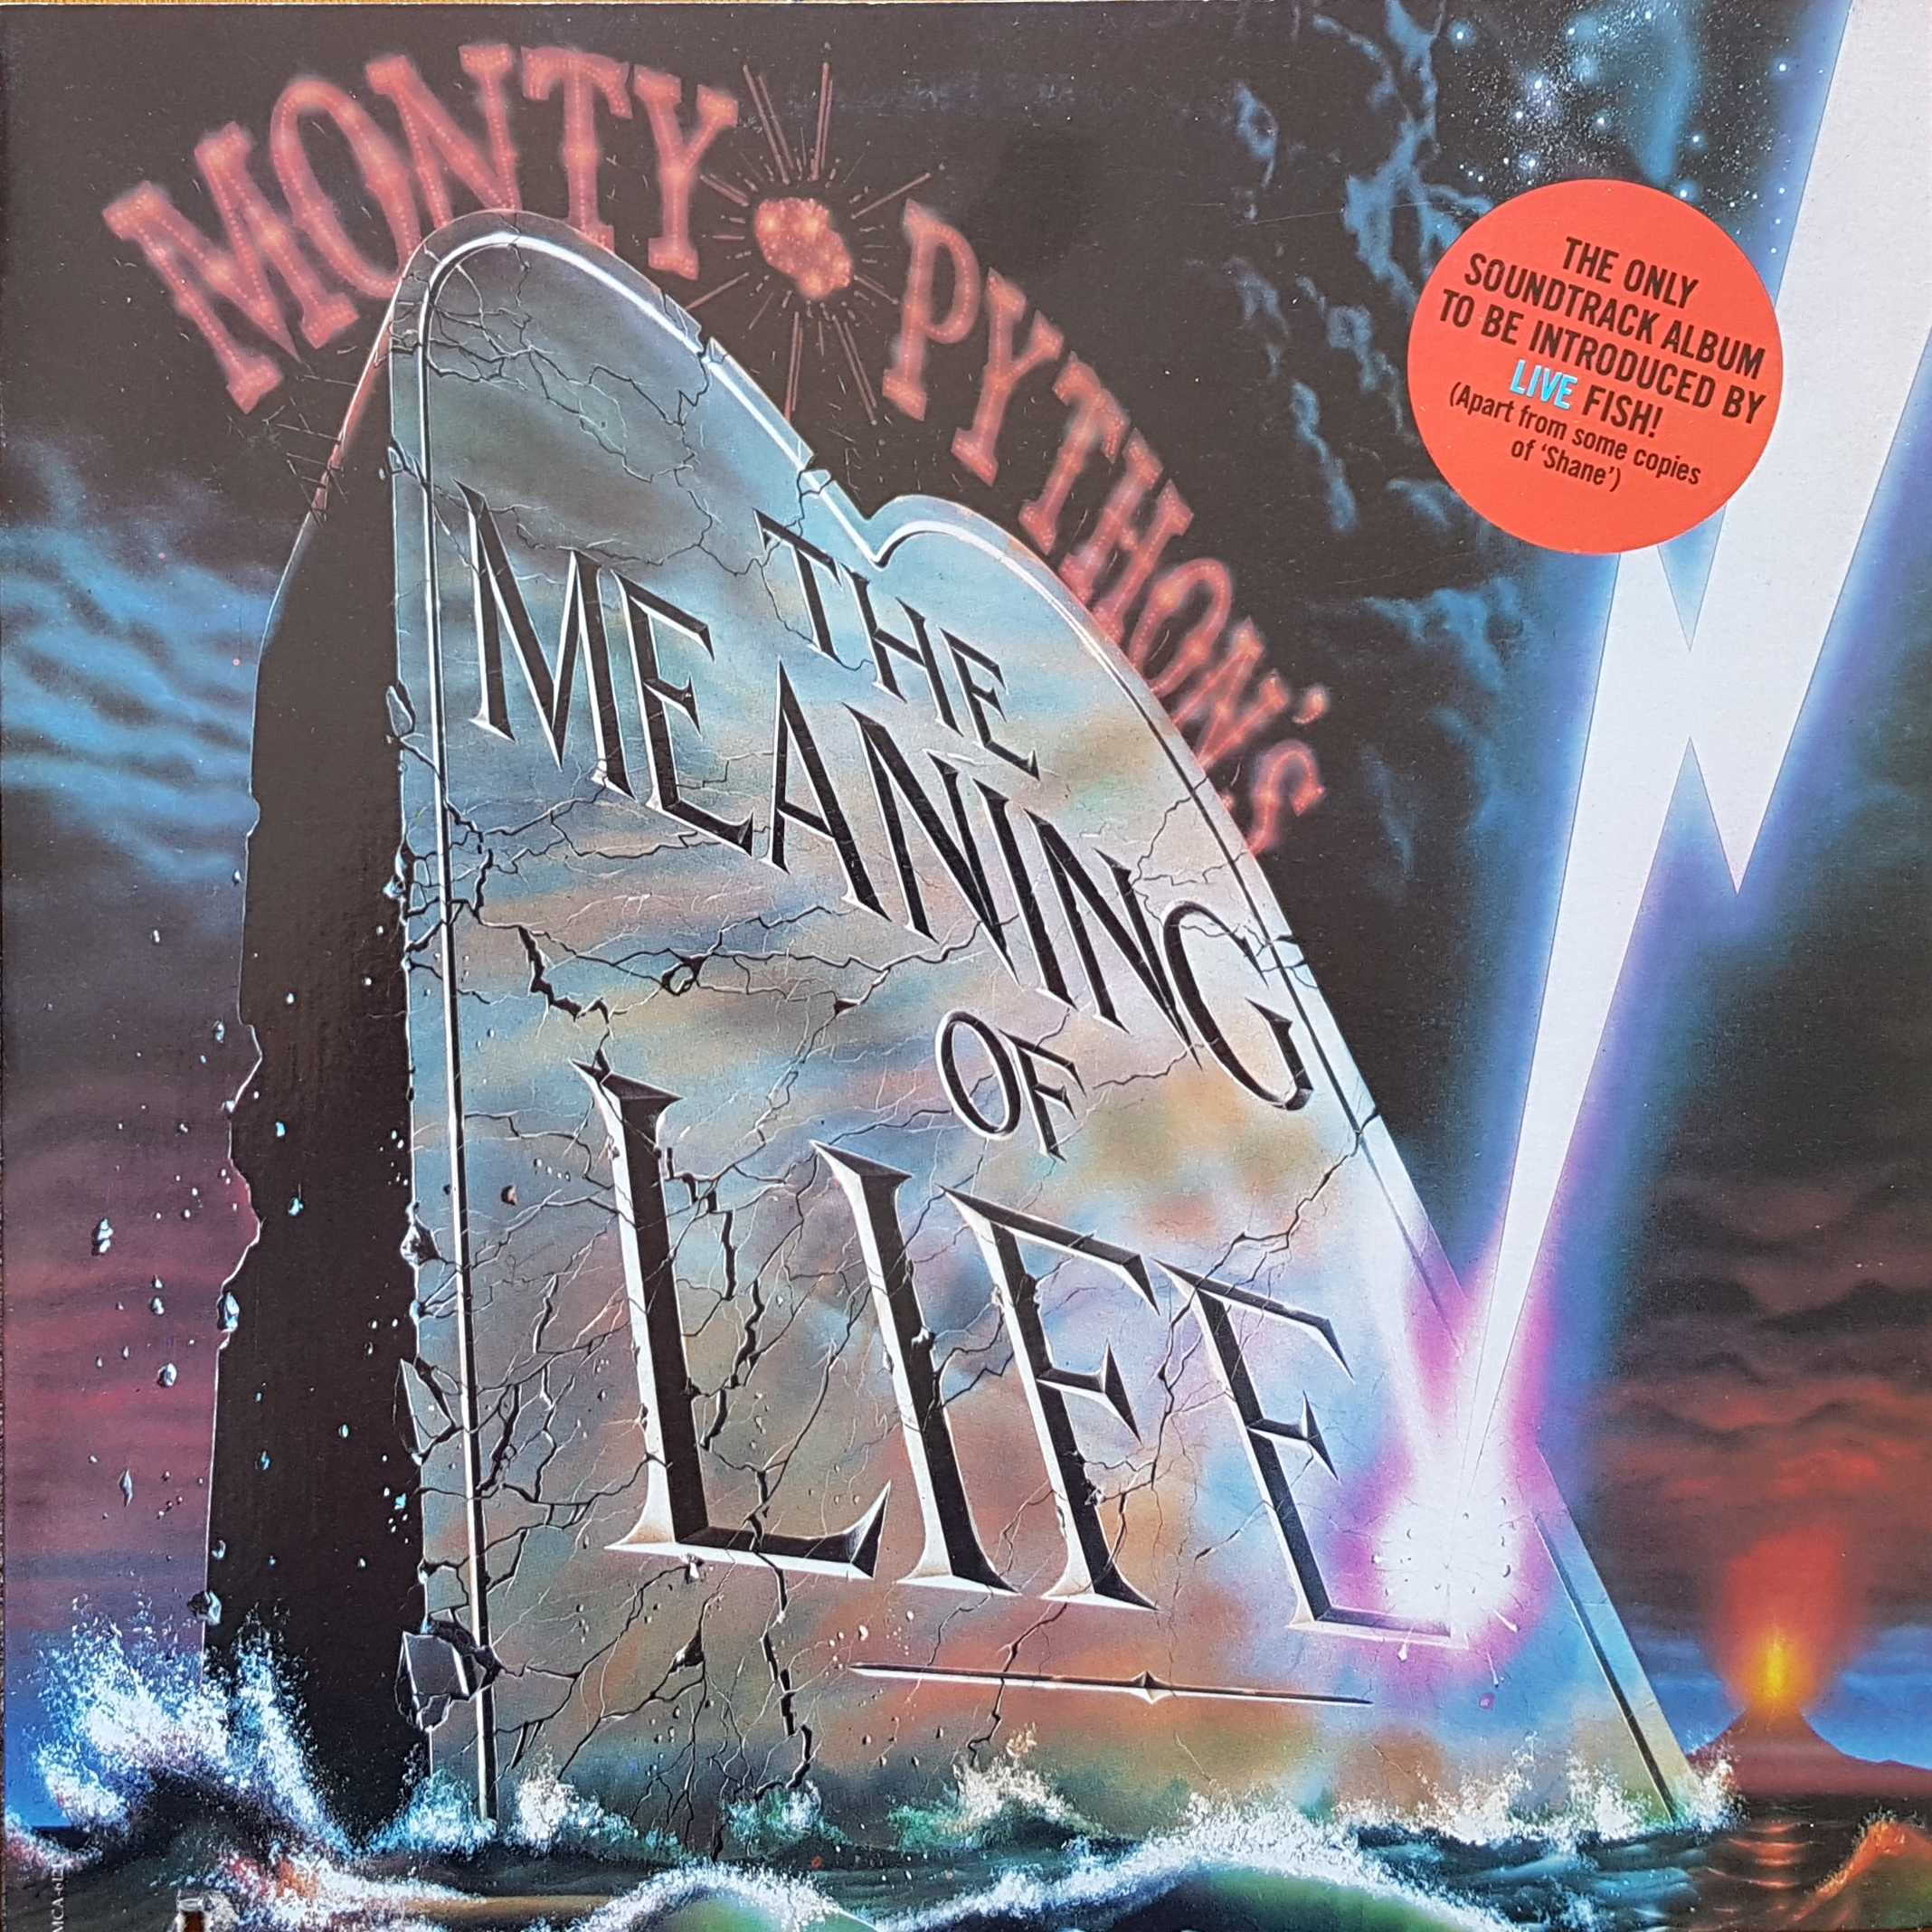 Picture of MCA 6121 The meaning of life by artist Monty Python from the BBC albums - Records and Tapes library